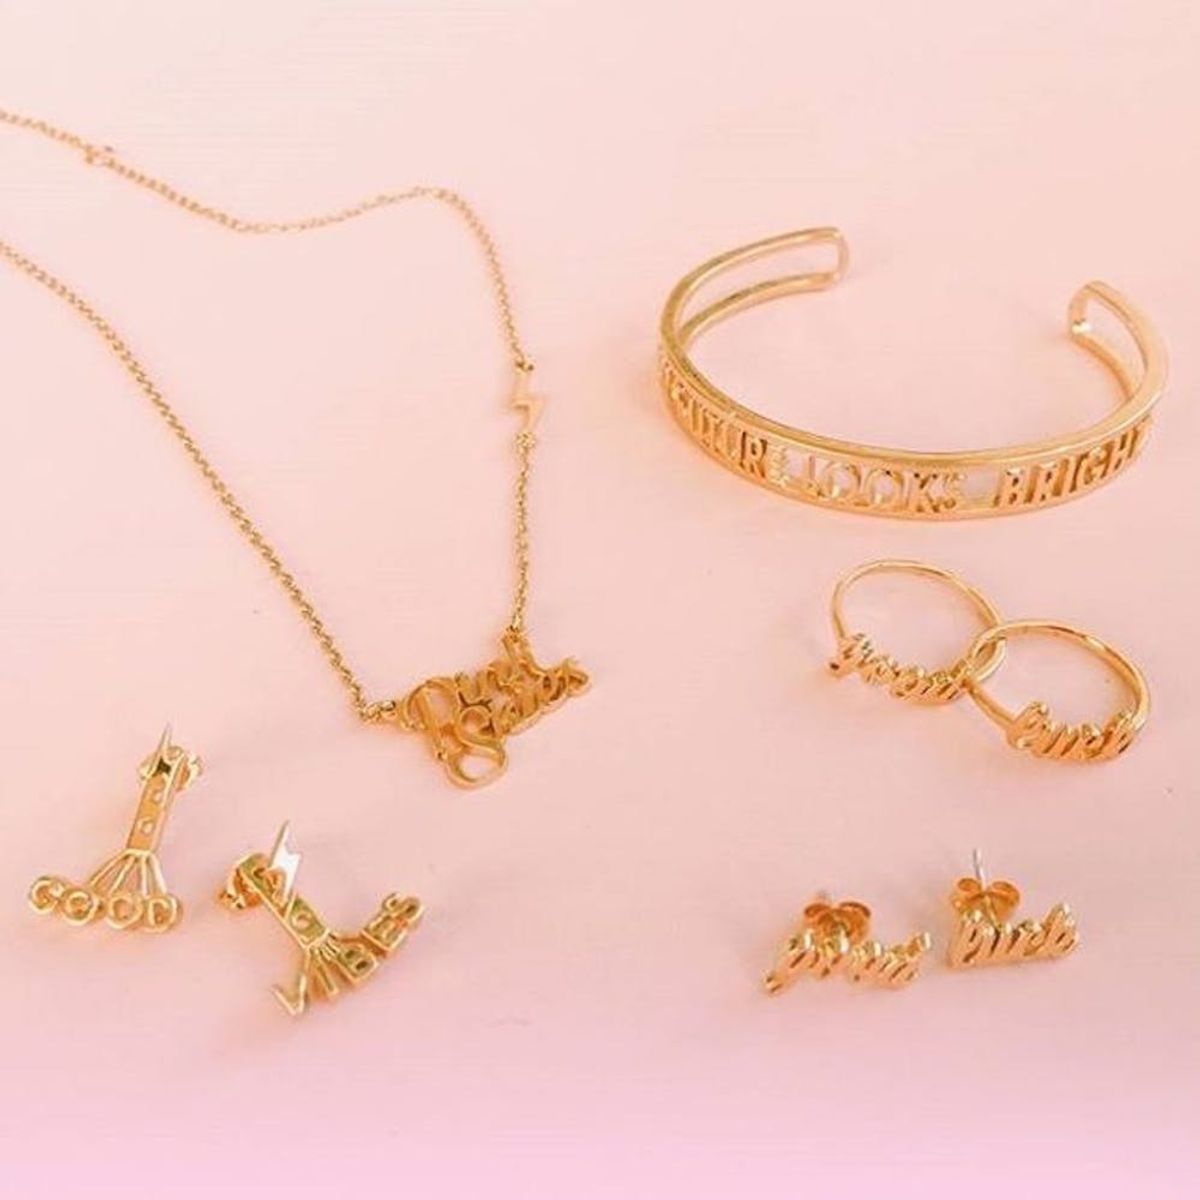 Ban.do x Bing Bang’s New 5-Piece Jewelry Collab Is Effin’ Adorable